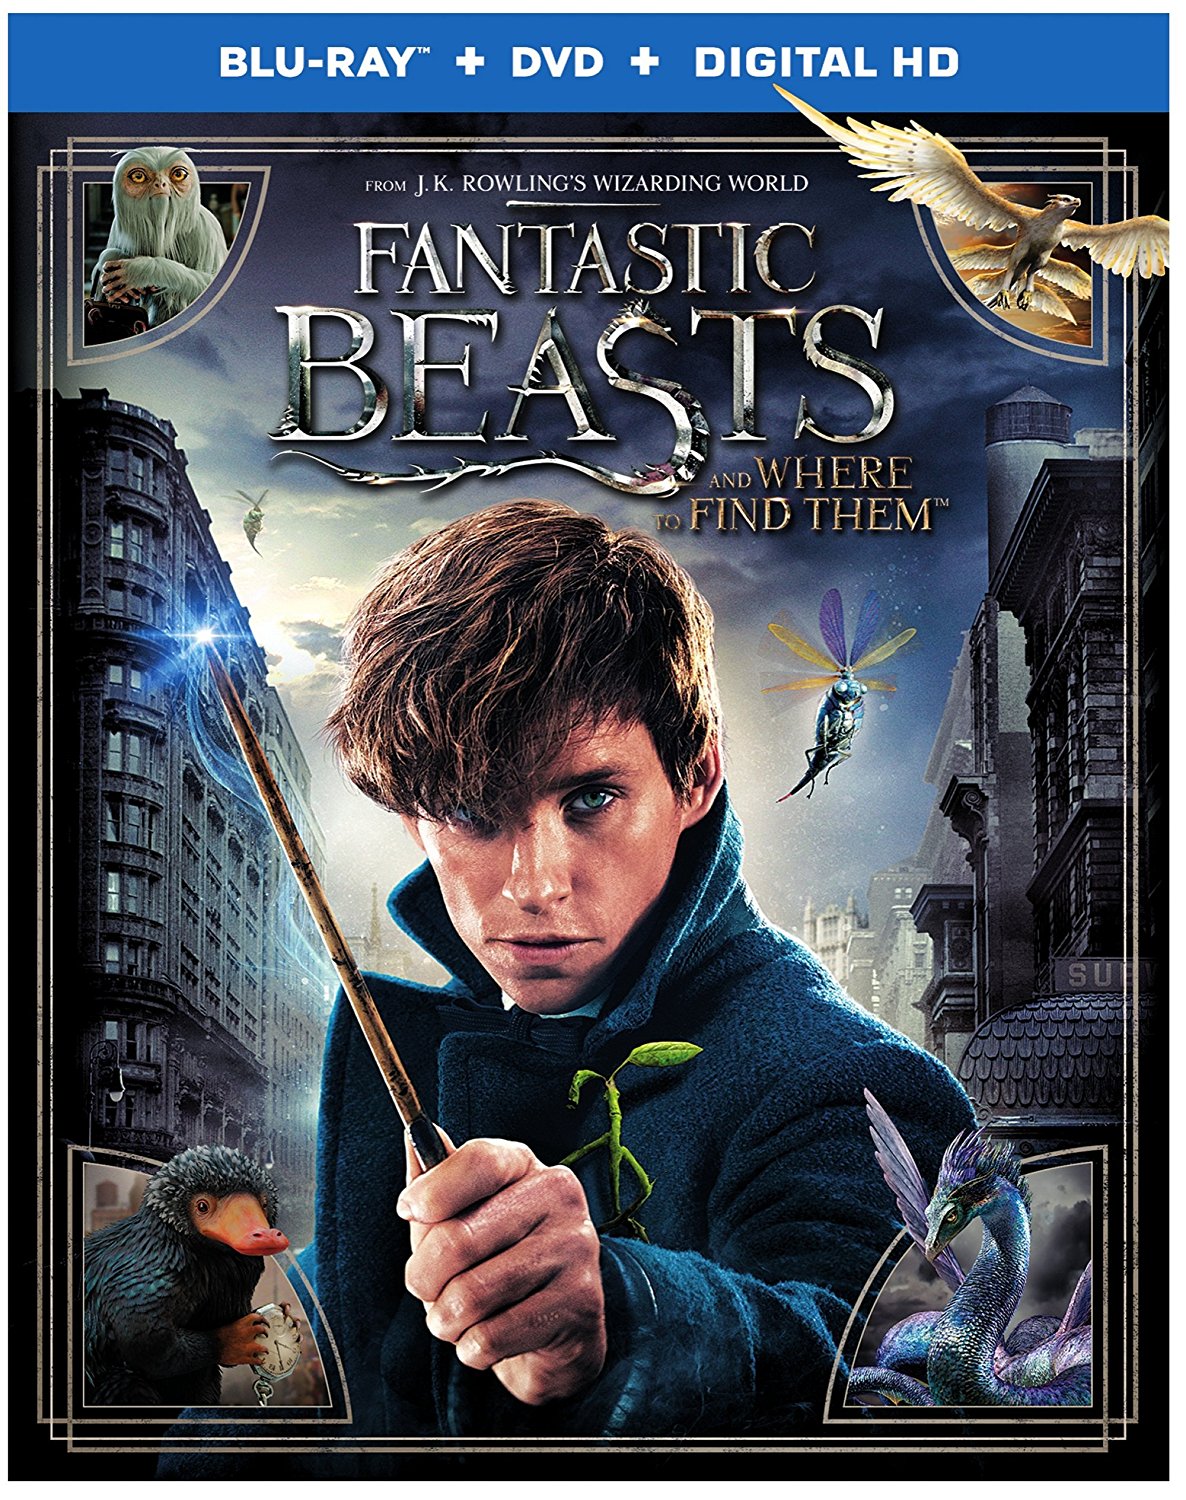 Fantastic Beasts and Where to Find Them – Blu-ray + DVD + Digital HD UltraViolet Combo Pack – Just $12.99 for Prime Members!